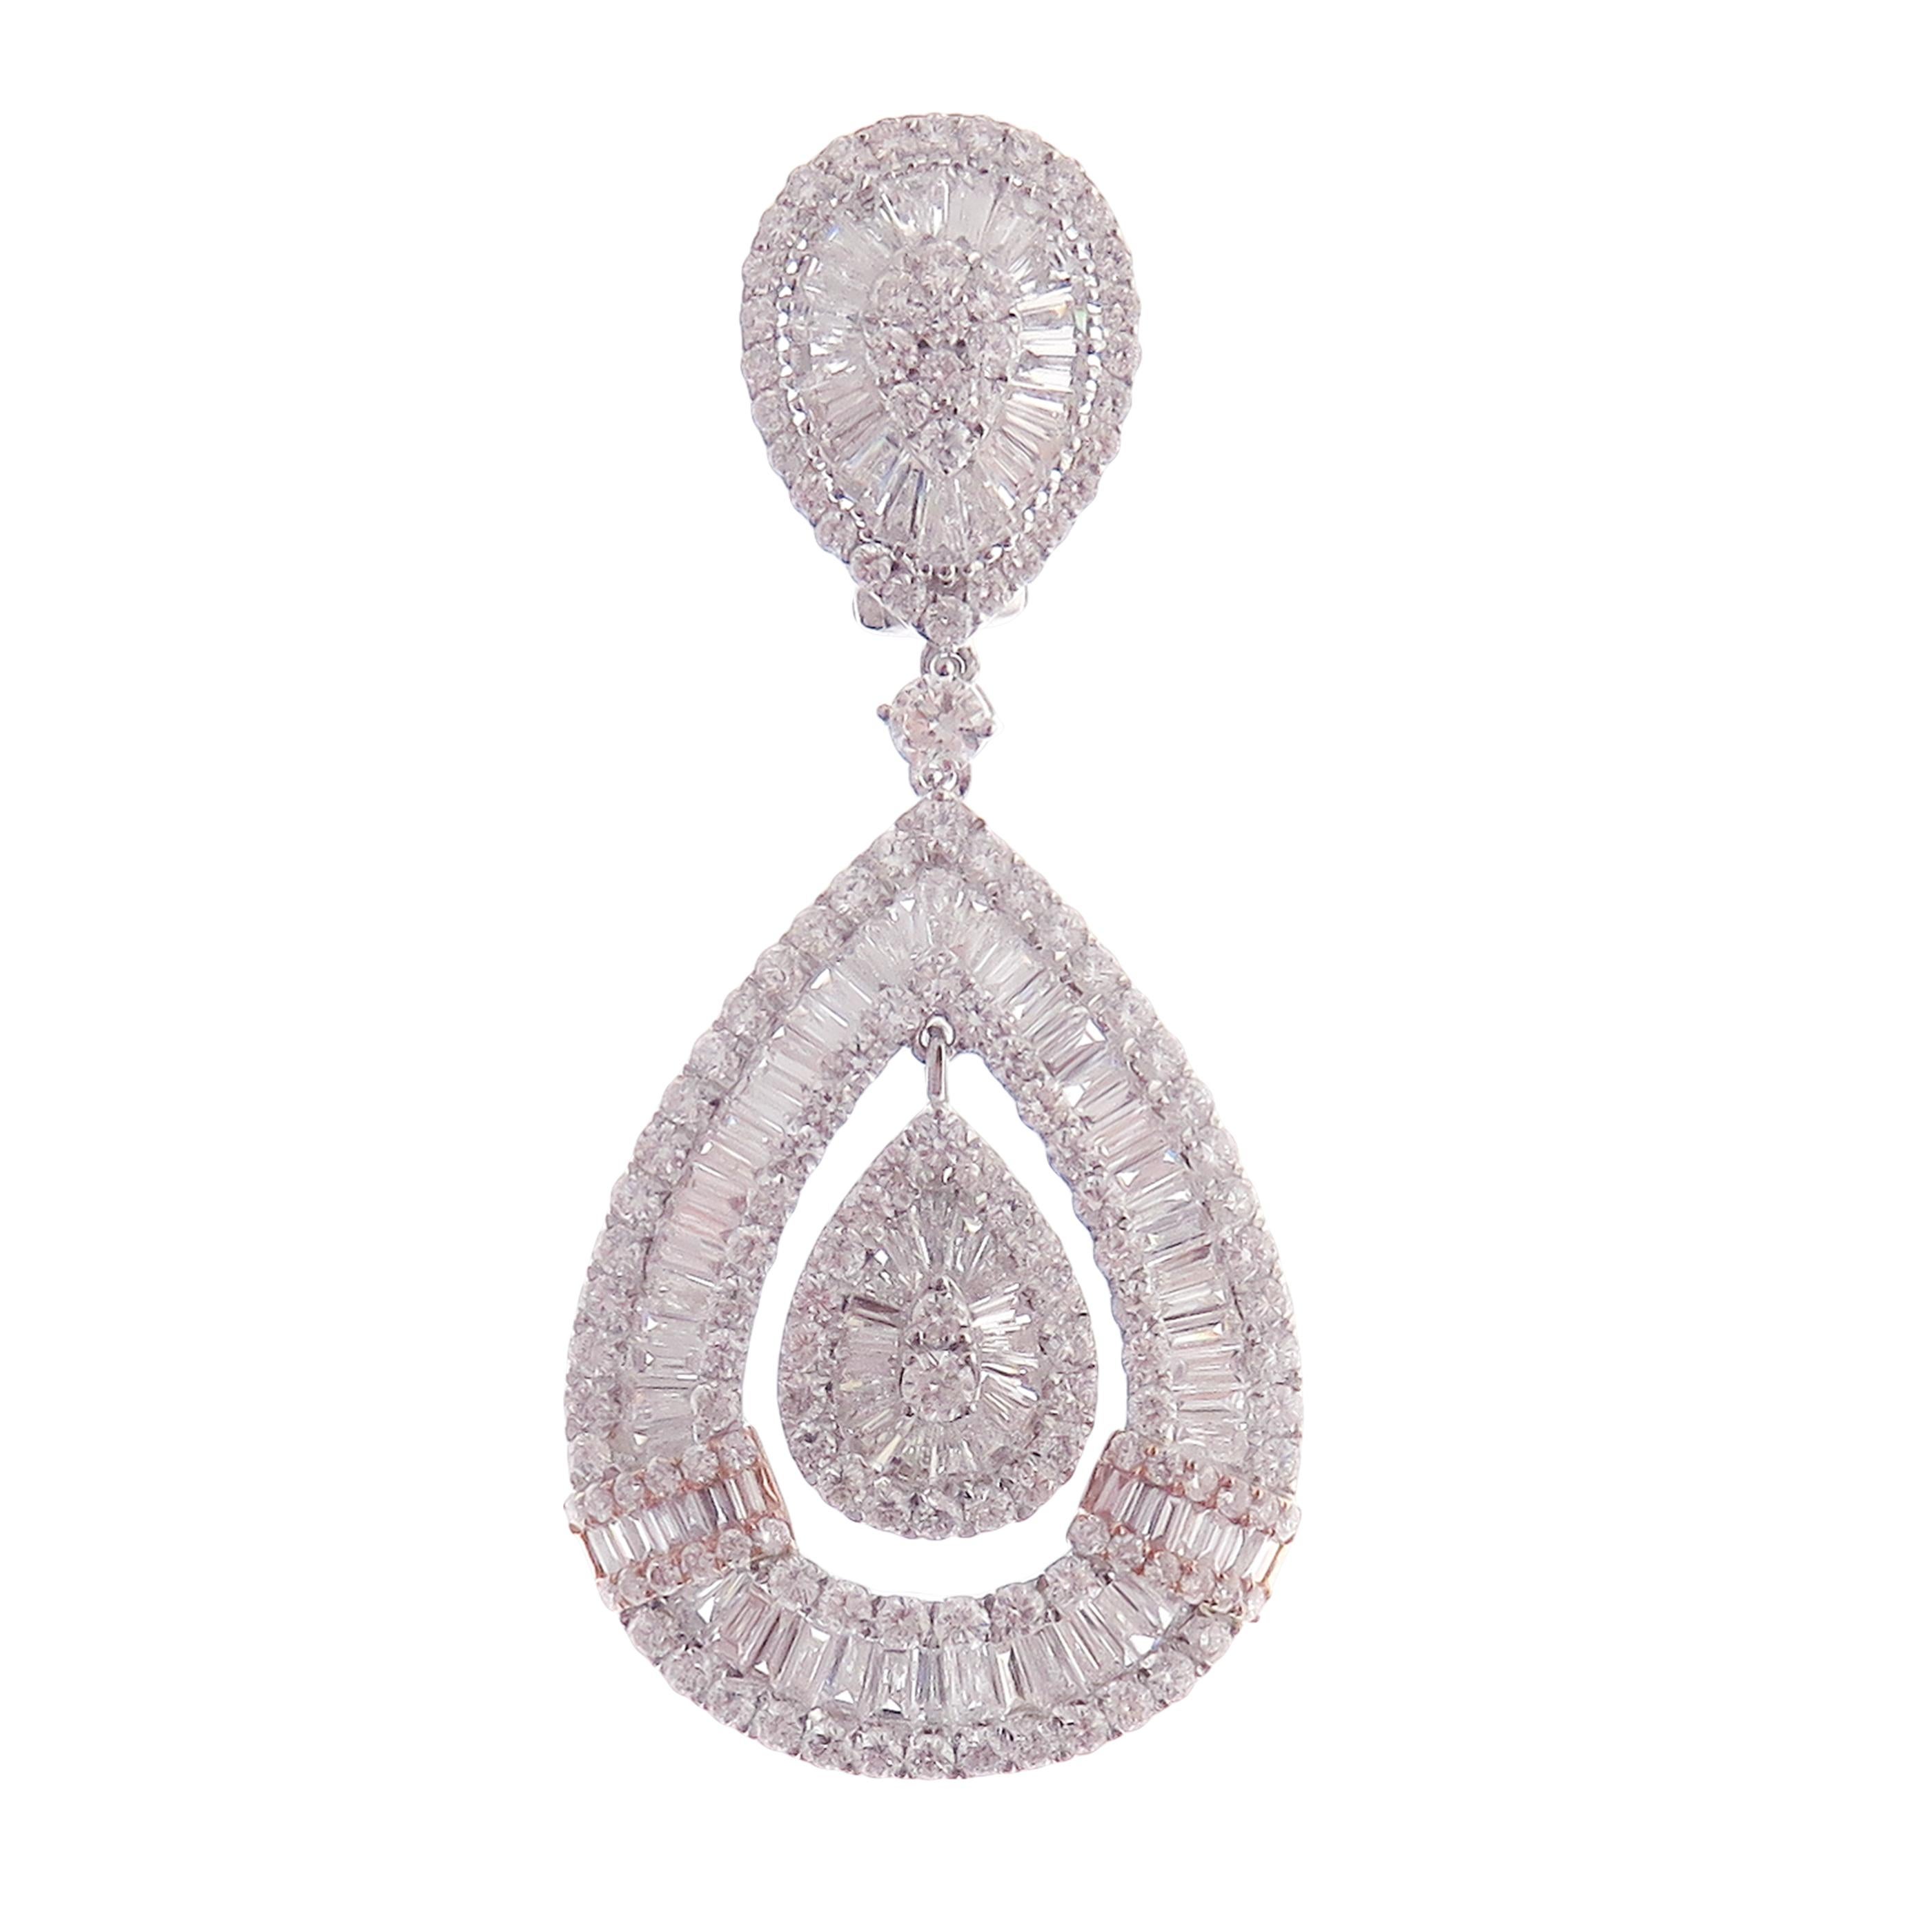 These modern pear baguette earrings are crafted in 18-karat white gold, weighing approximately 11.82 total carats of SI-V Quality white diamond. French Clip backing. Beautiful rose gold accent.

Our Ballroom Collection feature earrings for those